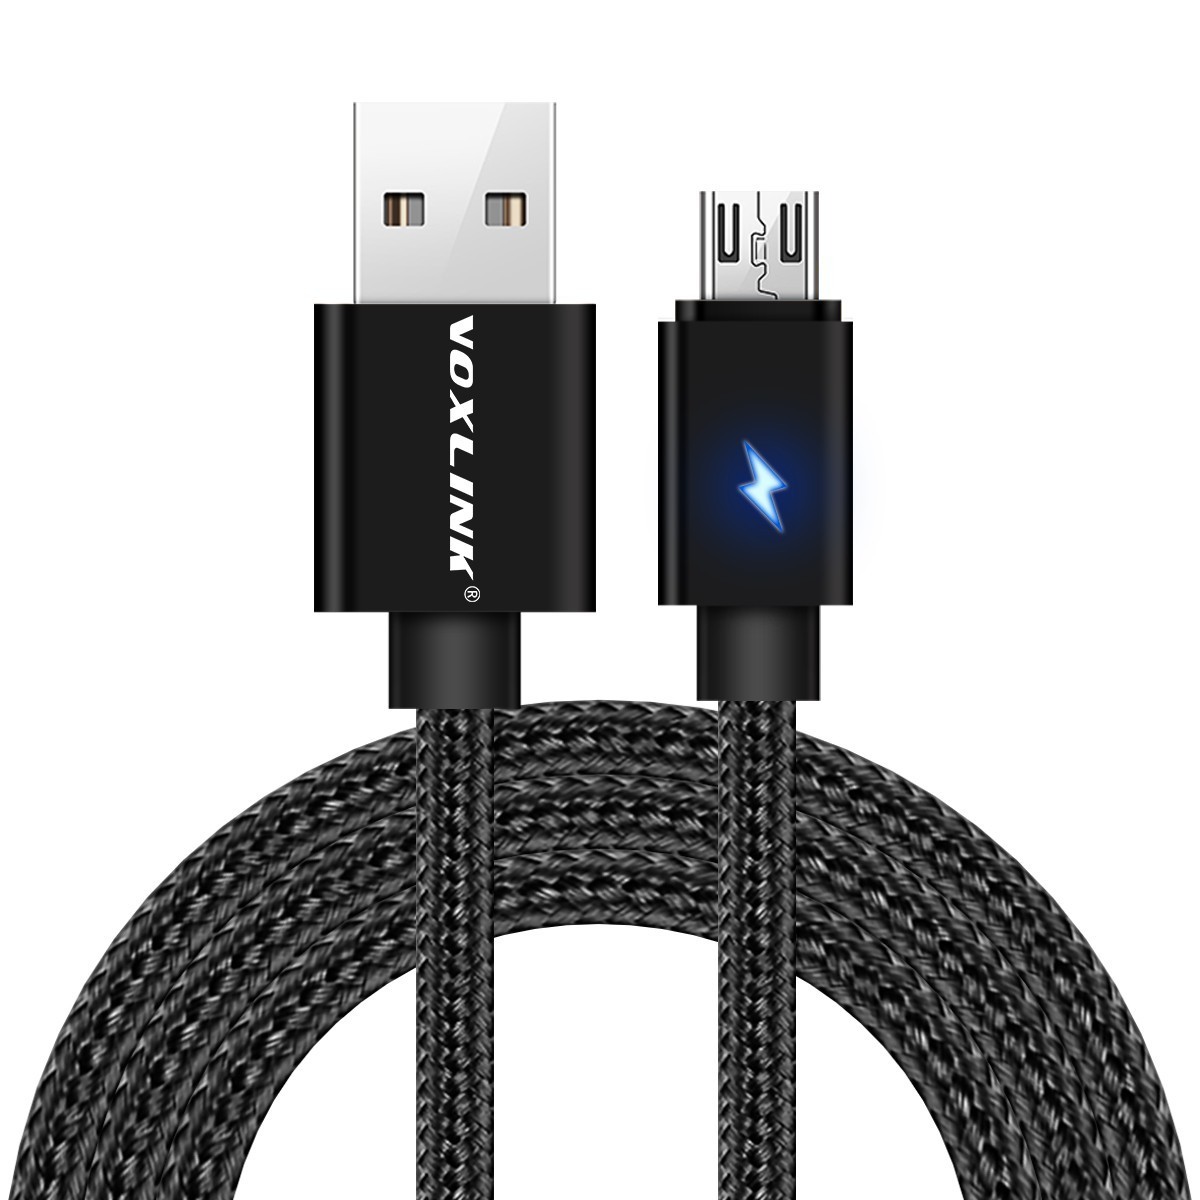 VOXLINK USB Type C Cable 2.4A USB C Fast Charging Data Cable for MacBook Xiaomi Mi4C Mi5 Oneplus 2 huawei Letv usb type-c cable black 1.2m micro